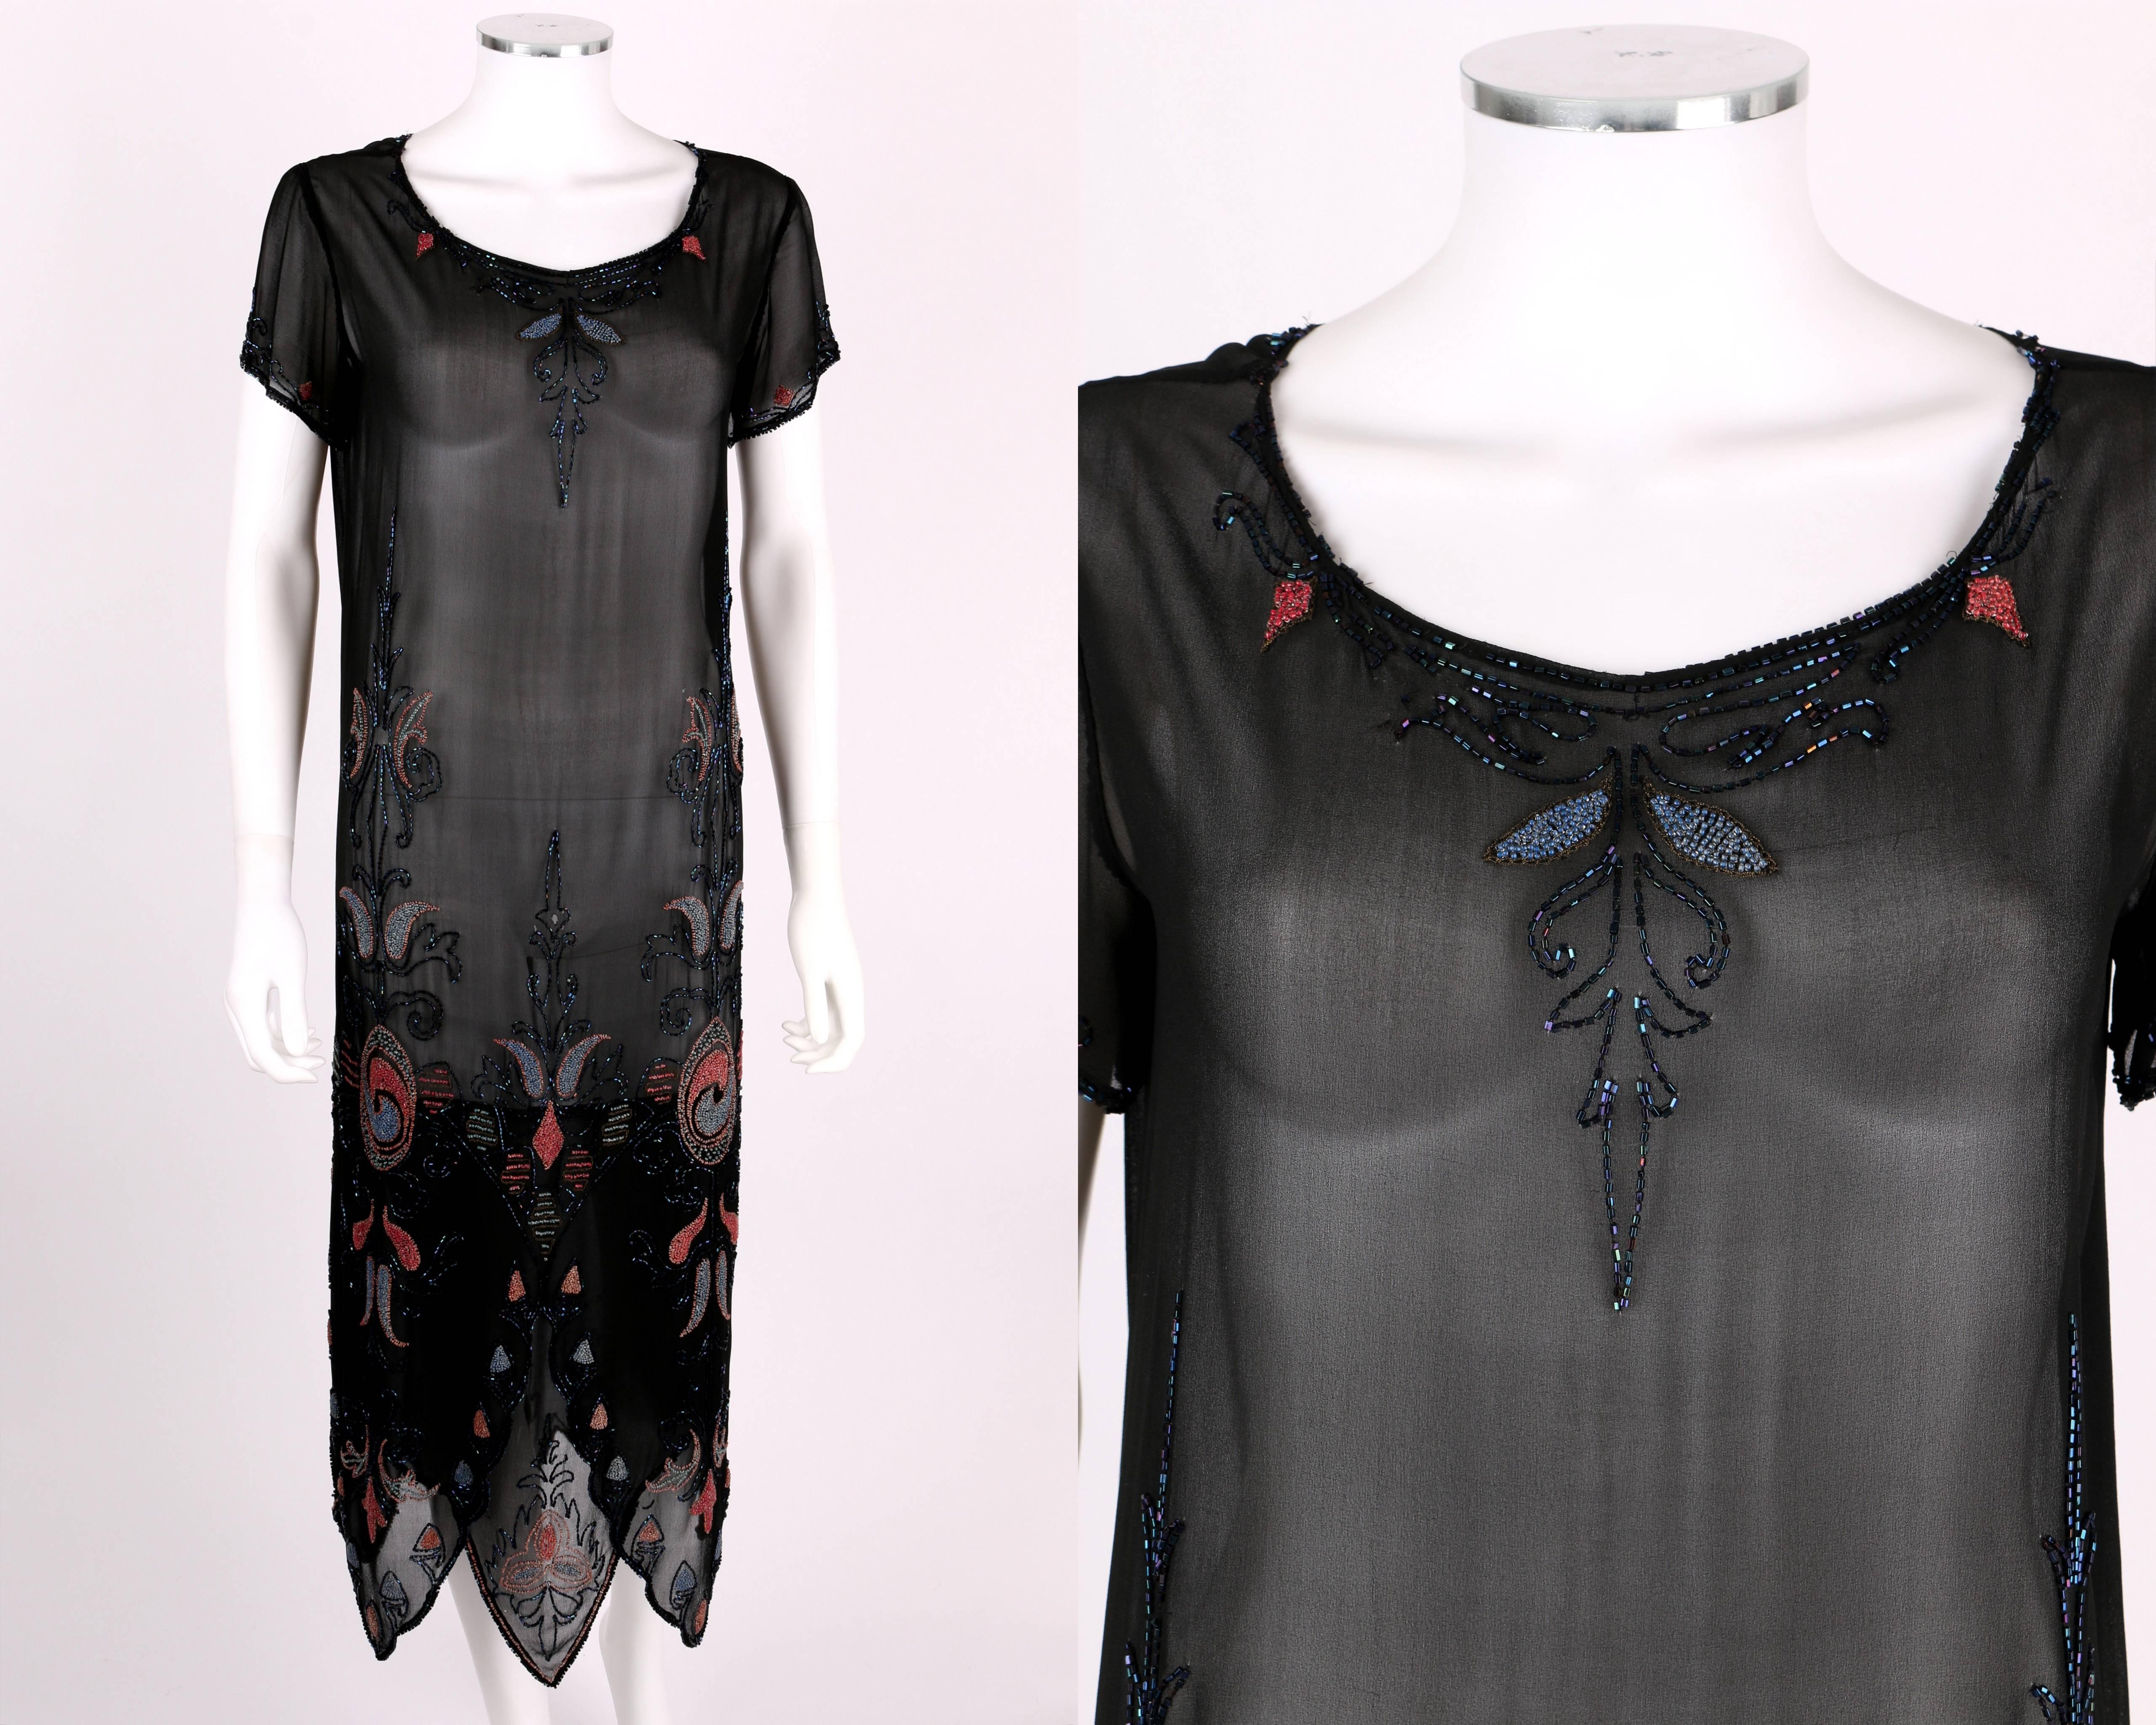 Vintage Couture c.1920's black silk georgette beaded flapper dress. Multicolor floral glass beaded embellishment along front, hemline, neckline, and cuffs. Scoop neckline. Short sleeves. Layered scallop hemline. Two side seam snap closures at waist